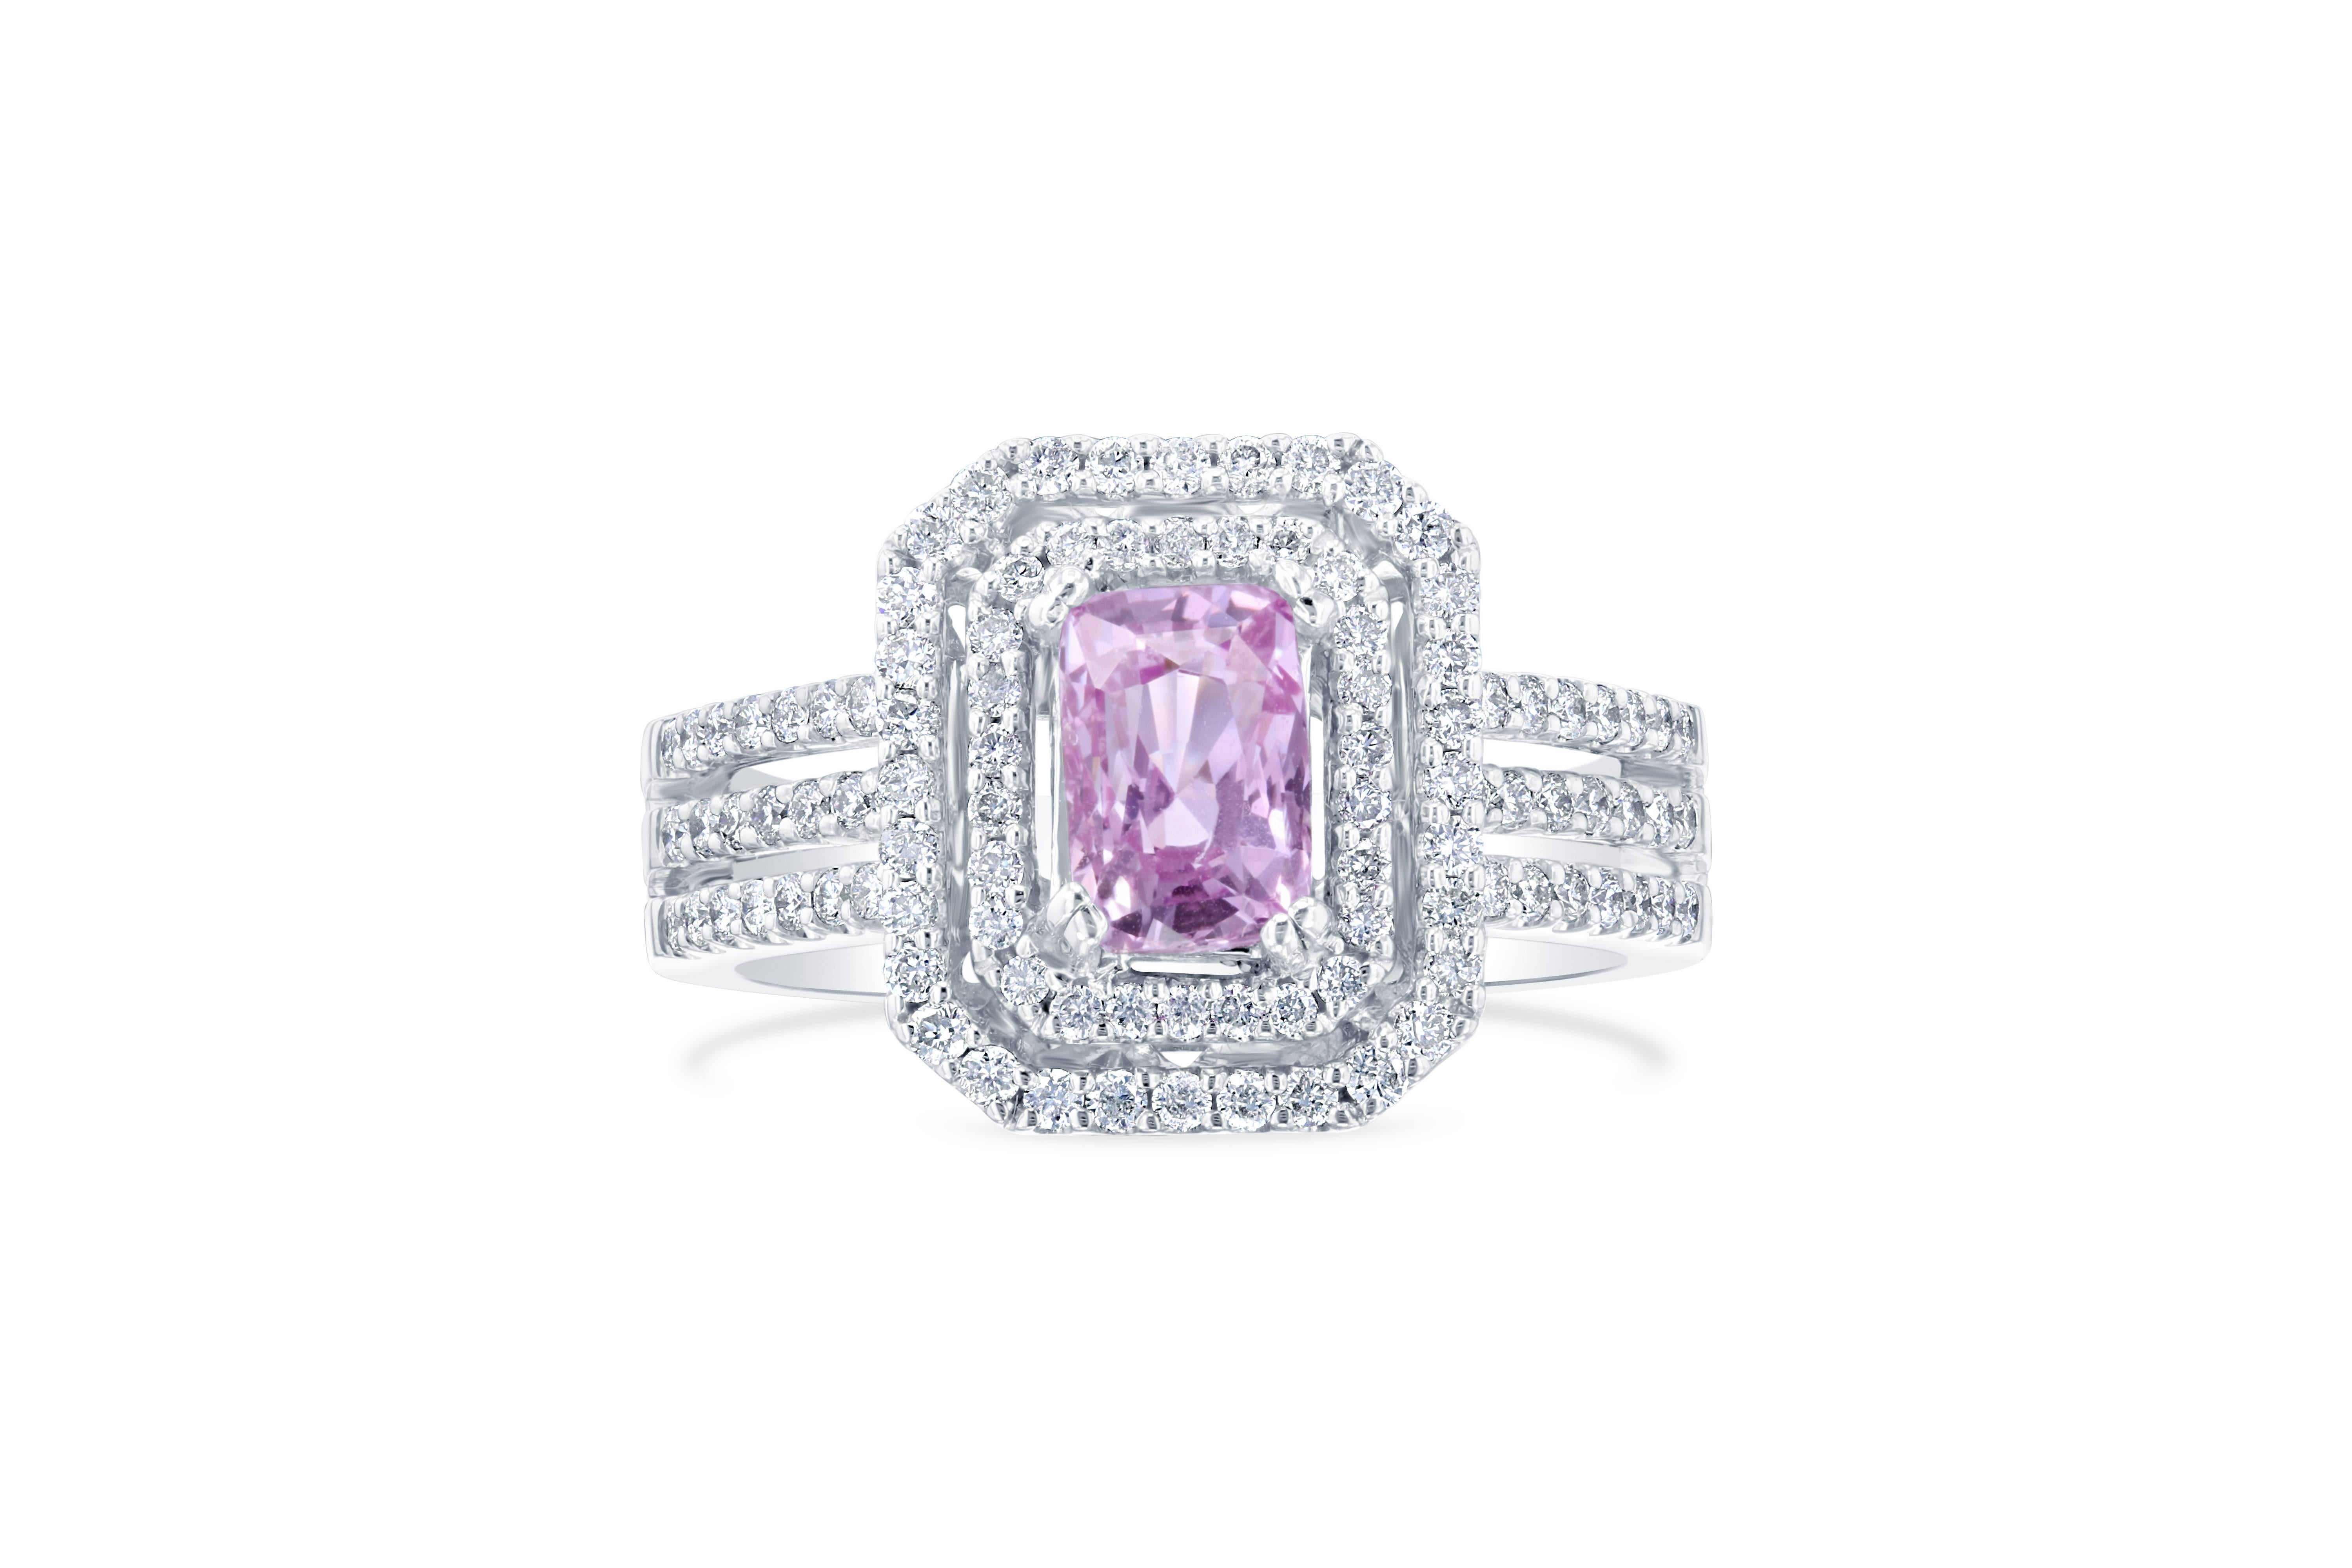 Gorgeous double halo engagement ring alternative! This ring has a Rectangular Cut 1.58 carat Pink Sapphire in the center of the ring and is surrounded by 100 Round Cut Diamonds that weigh 0.58 carat. The ring is casted in 18K White Gold that weighs